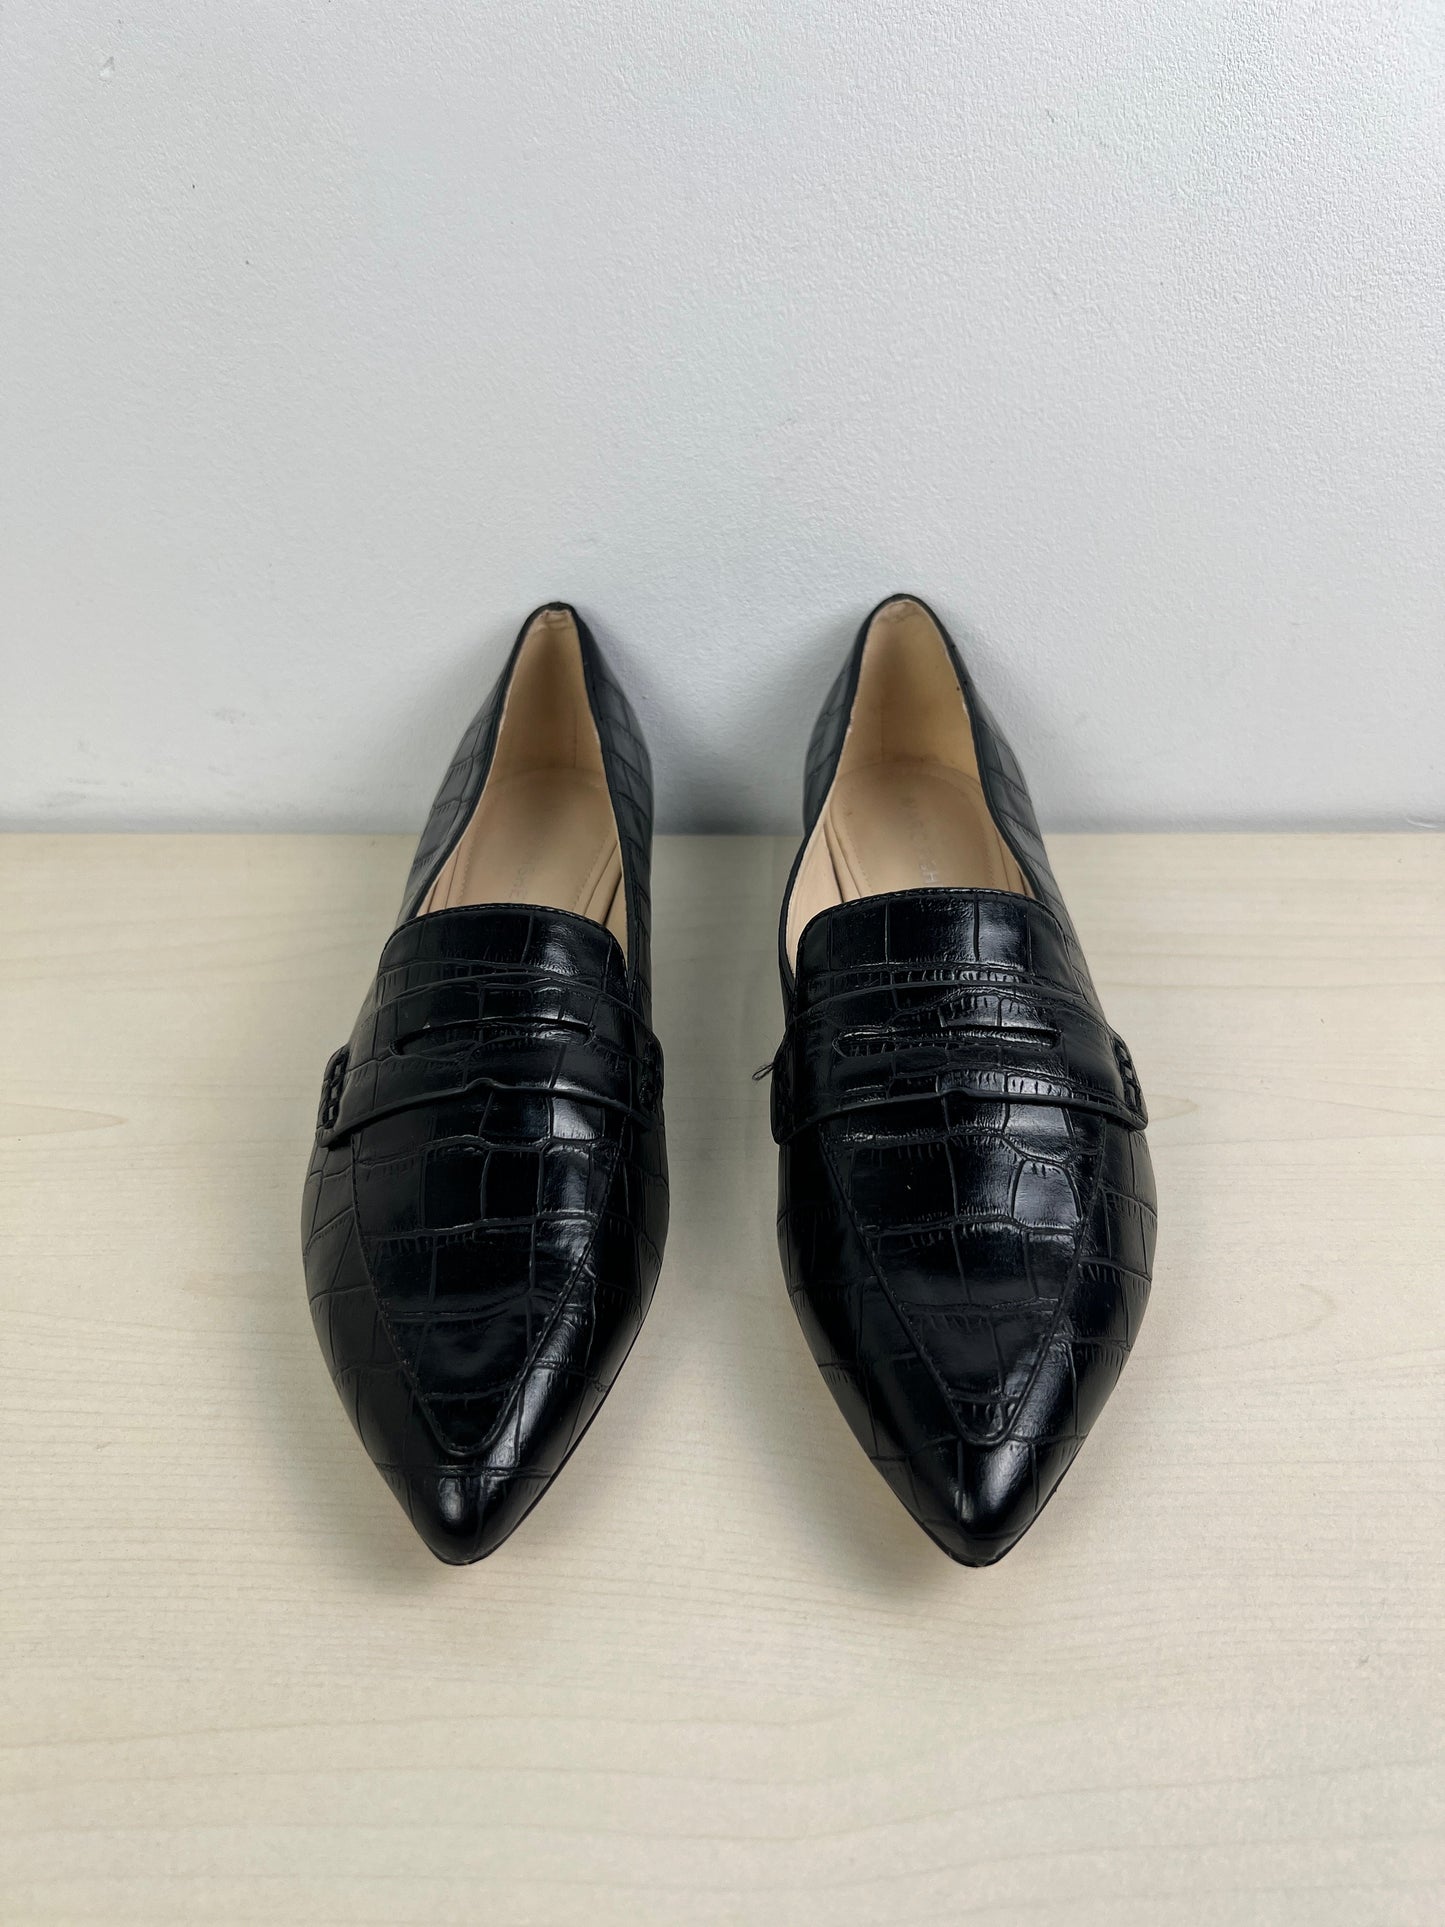 Black Shoes Flats Marc Fisher, Size 8